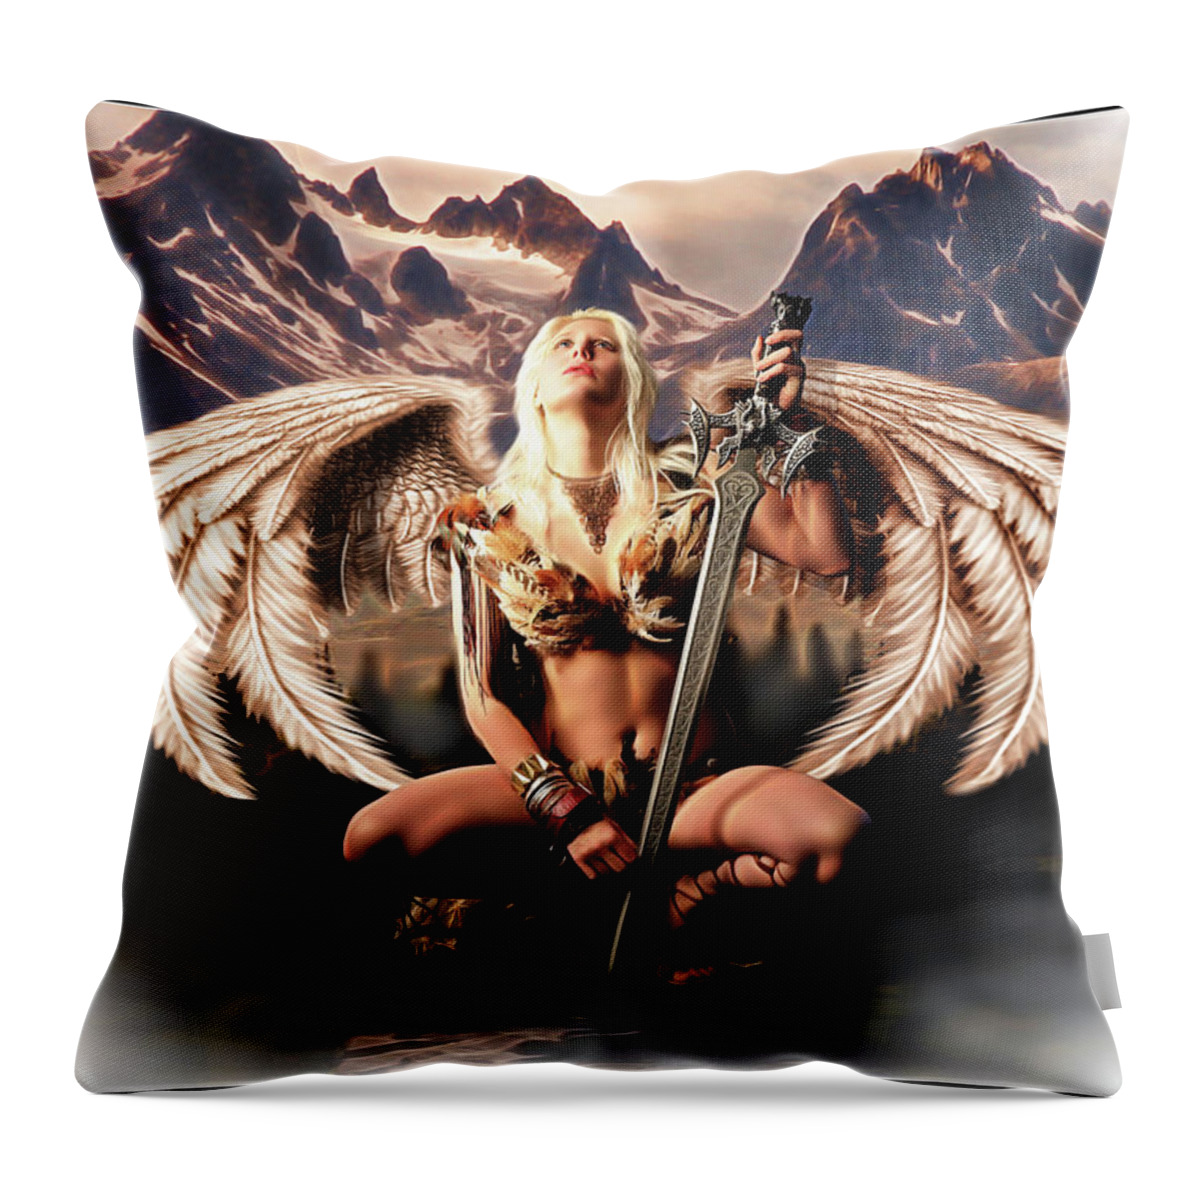 Hawk Throw Pillow featuring the photograph Talon Of The Hawk Woman by Jon Volden